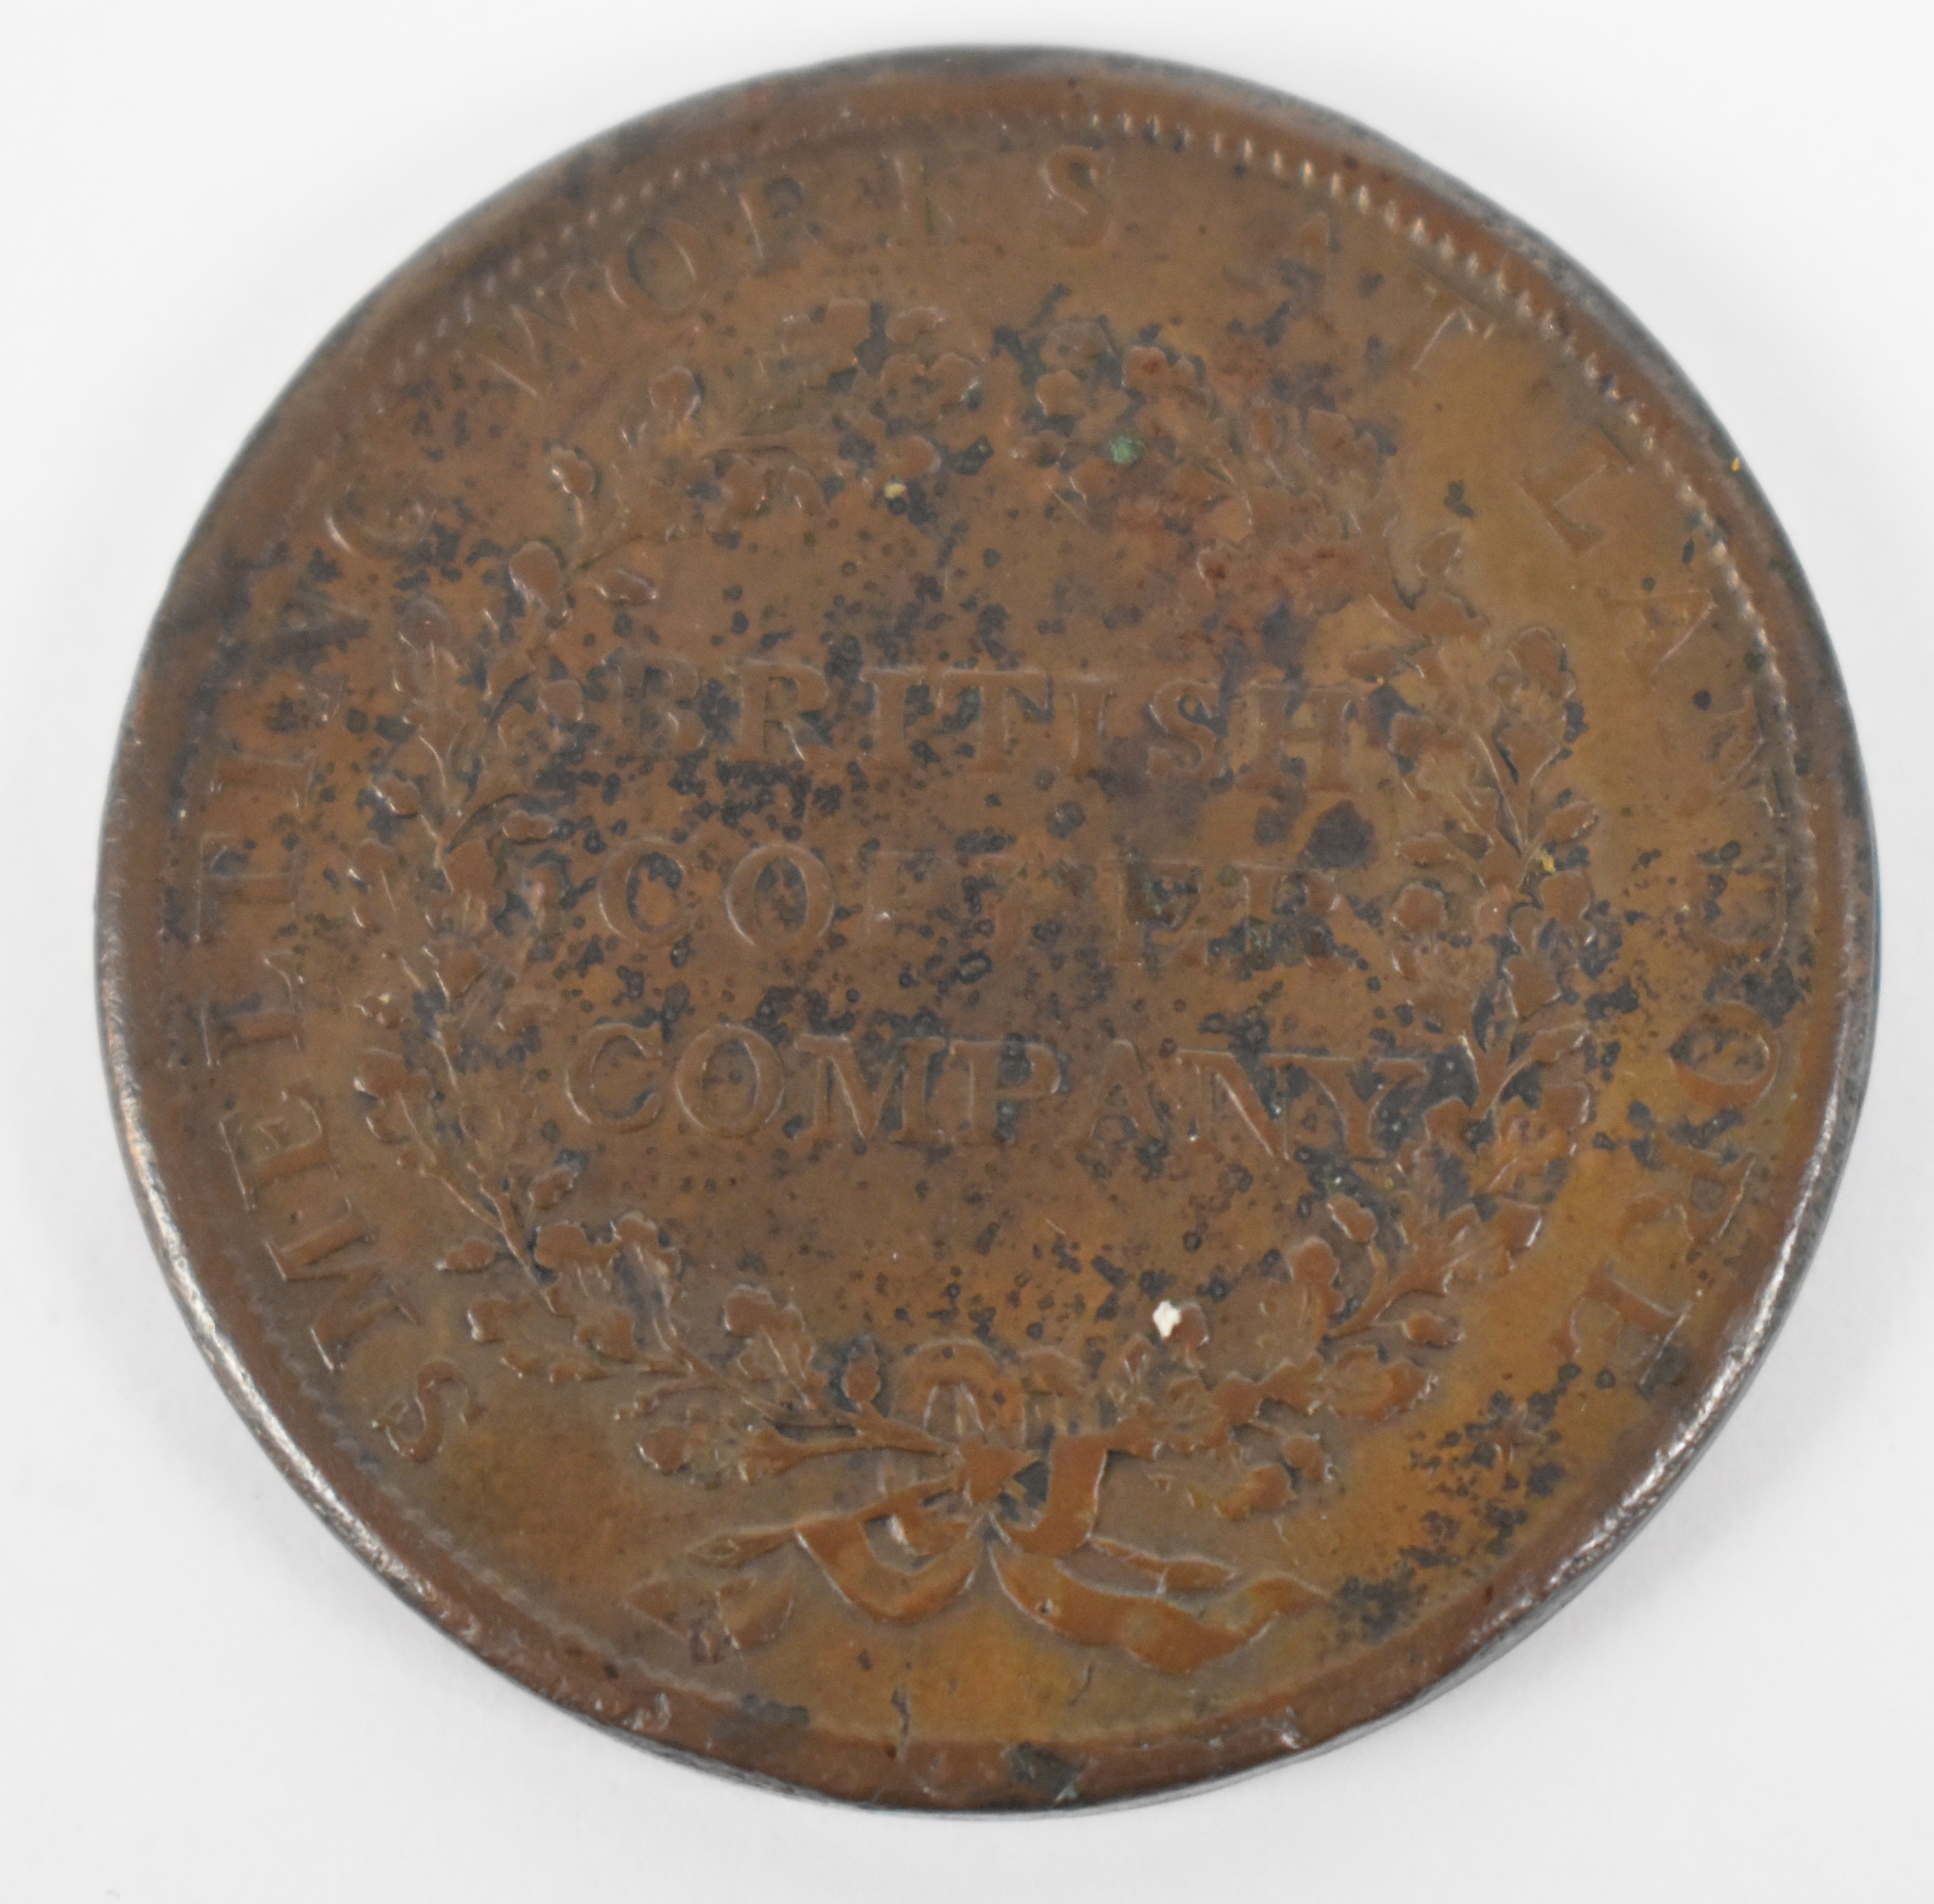 1812 Walthamstow British Copper Company Rolling Mills one penny token - Image 2 of 4